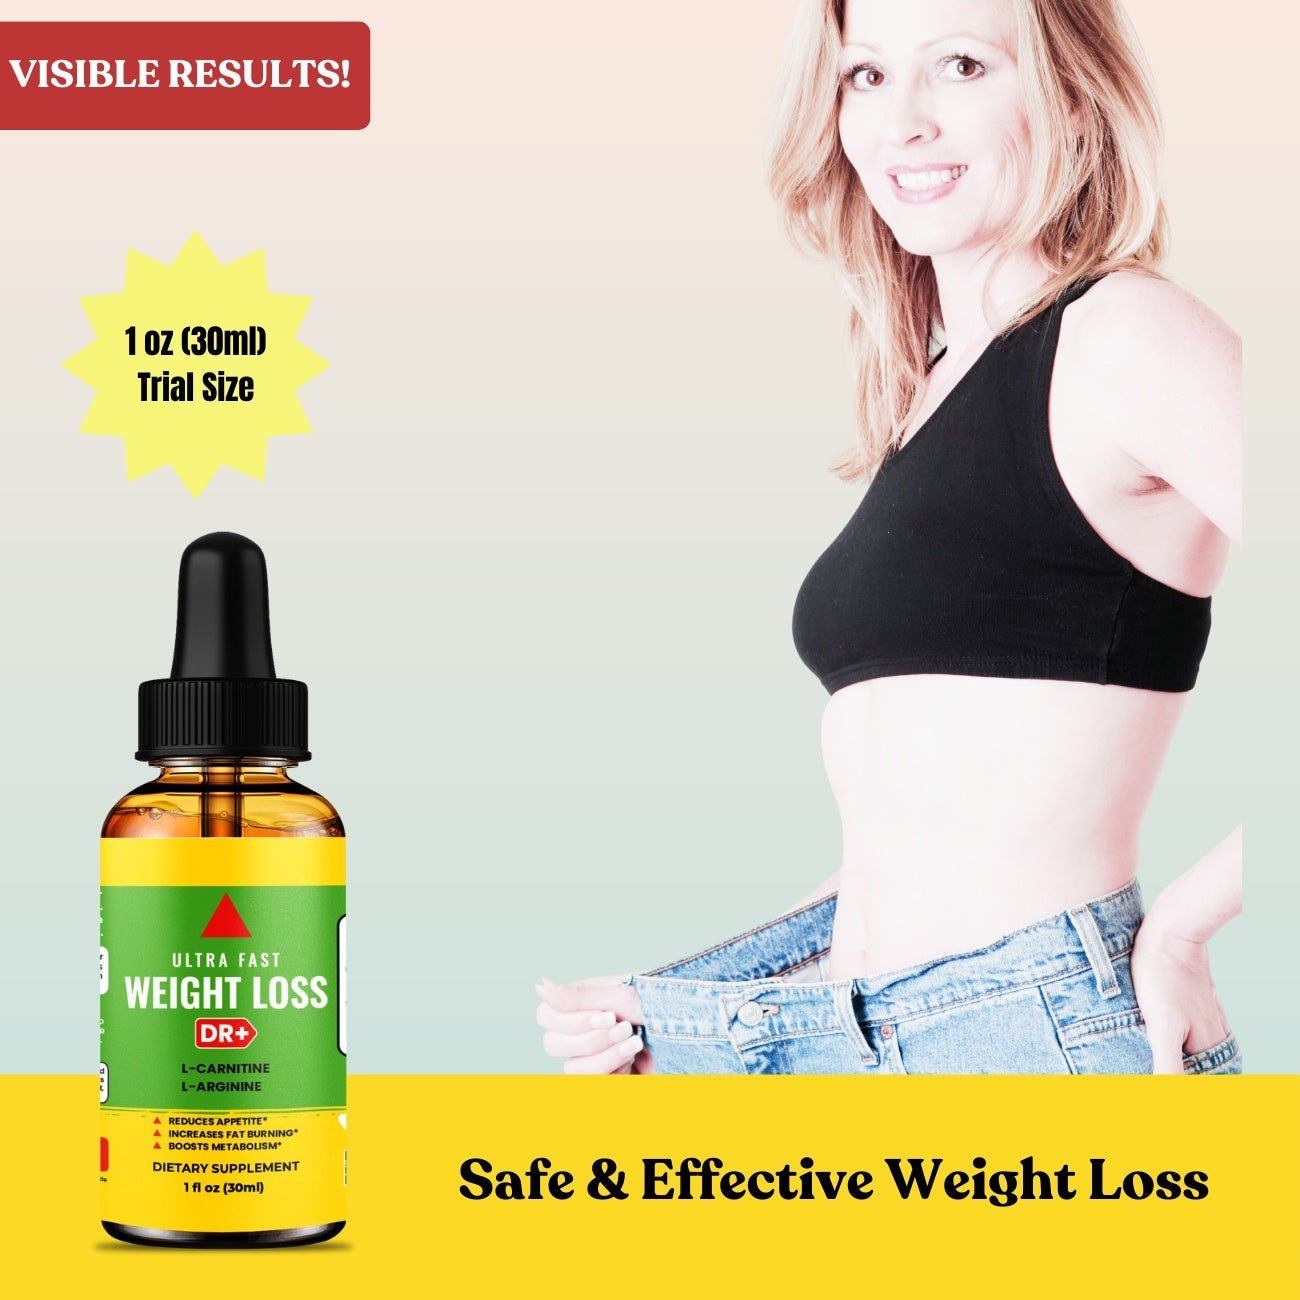 Diet Drops - Suppress Appetite, Burn Fat, Boost Energy - Fast Results | 1 oz - Herblif Nutrition USA